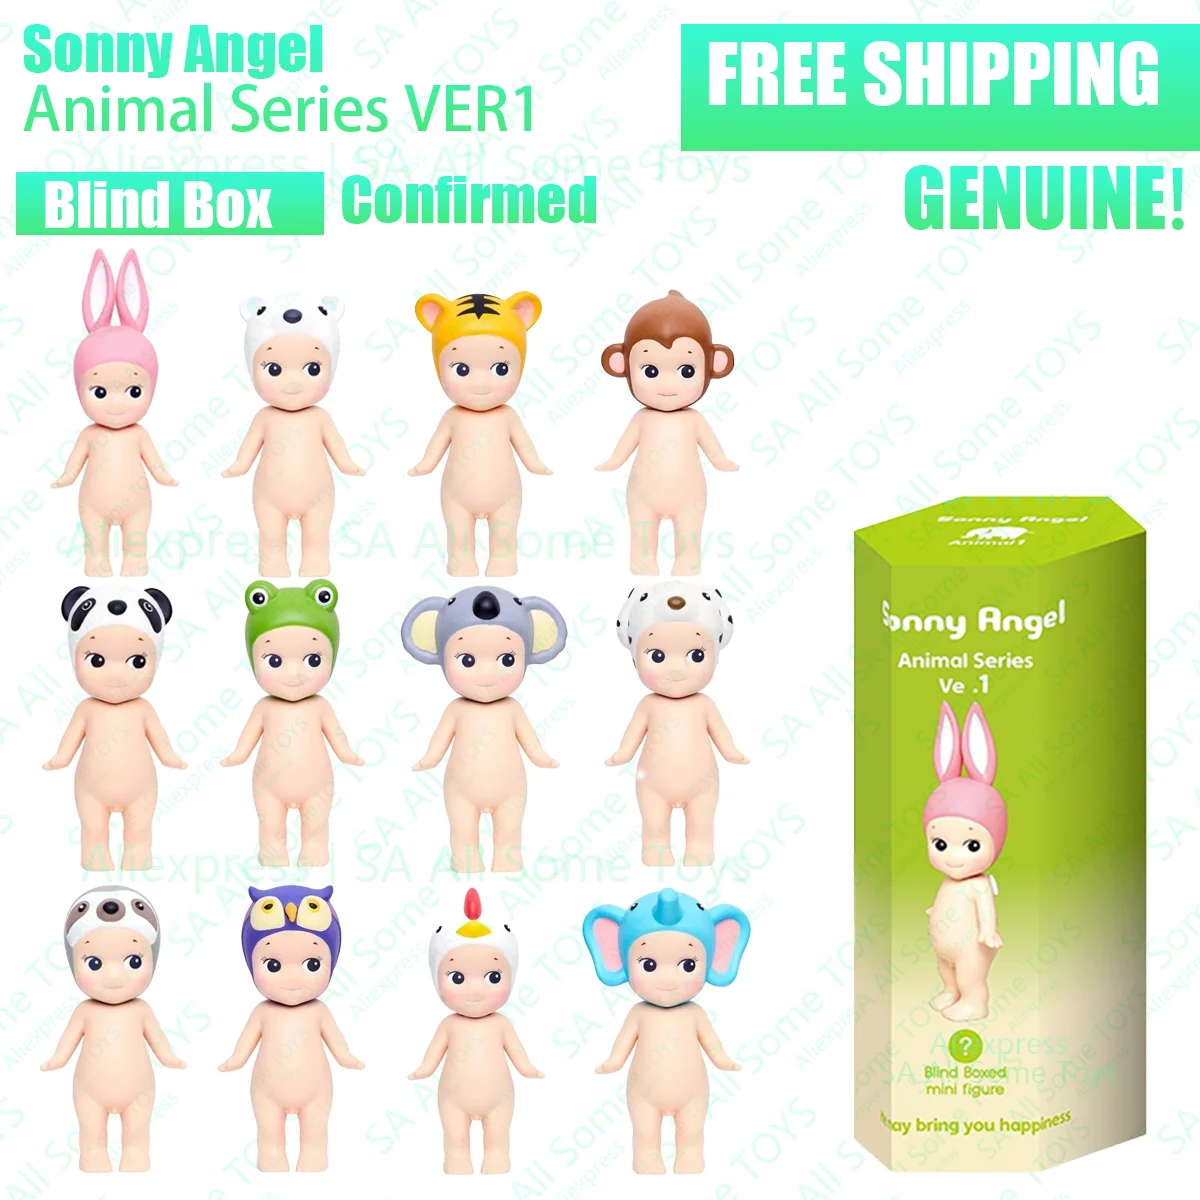 

Sonny Angel Animal Series VER1 Blind Box Confirmed style Genuine telephone Screen Decoration Birthday Gift Mysterious Surprise